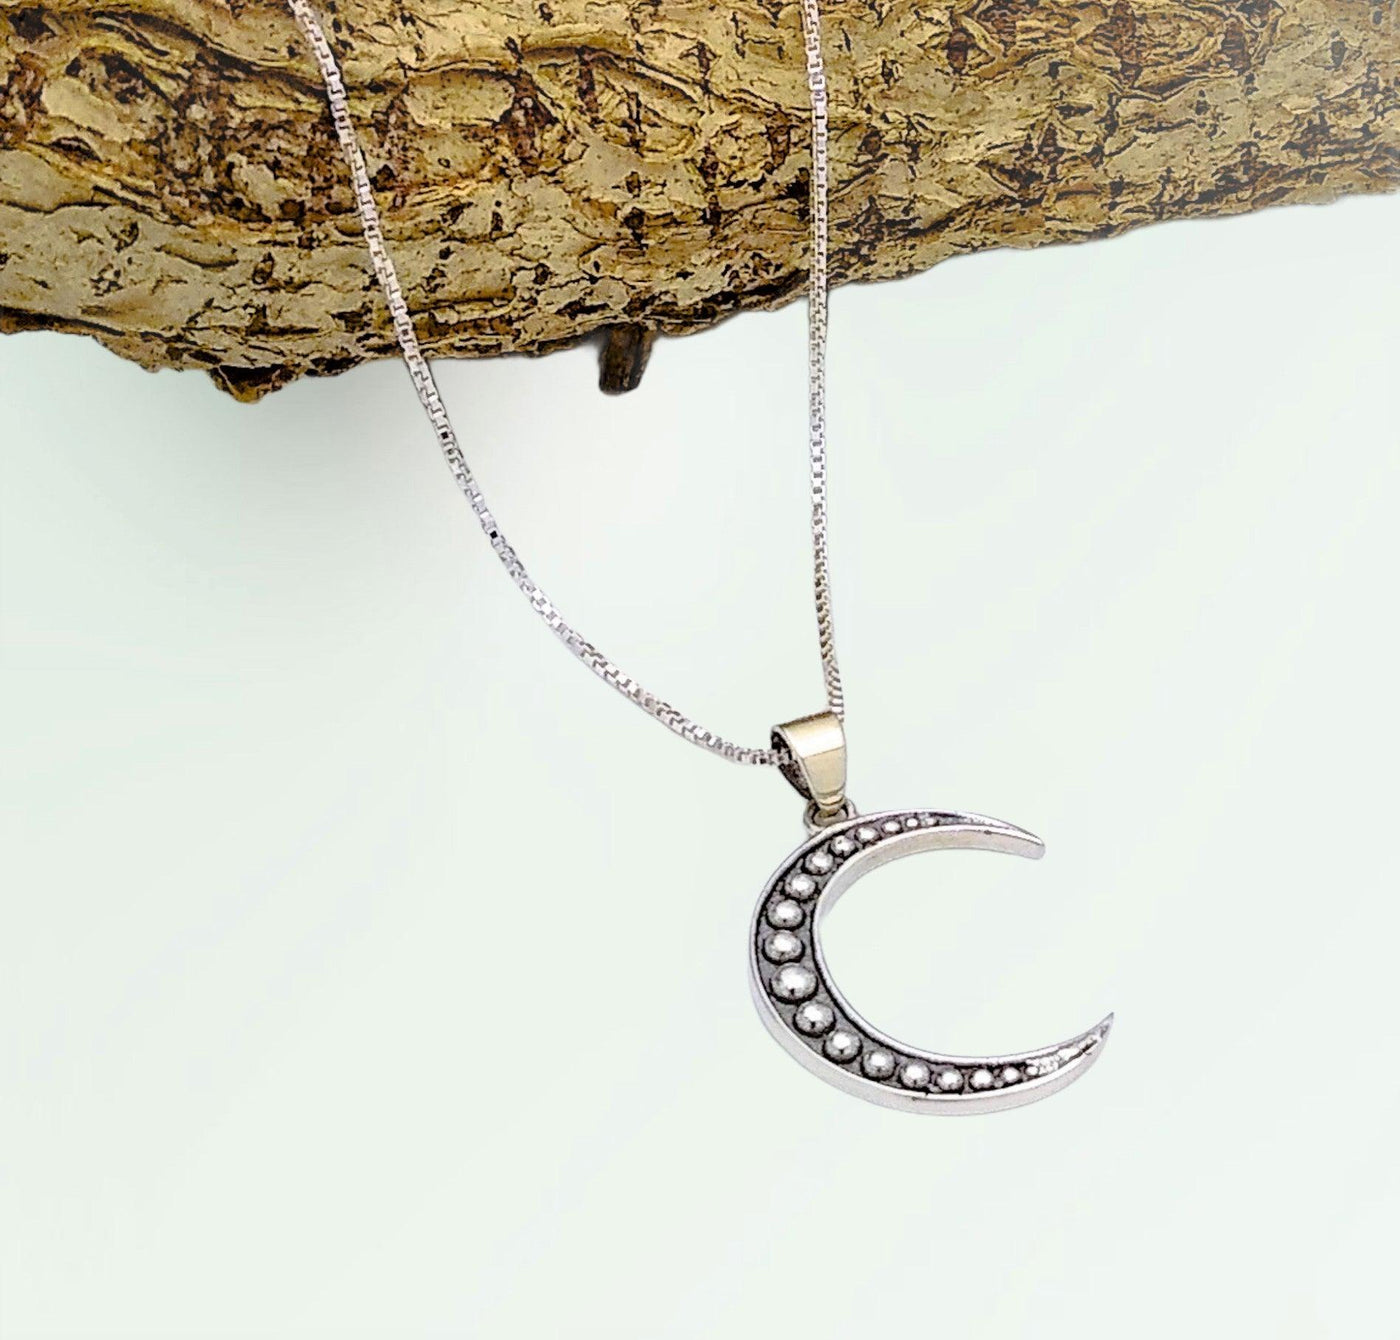 Sterling silver crescent moon pendant with 27 silver balls inlaid in the middle. Comes on an 18-inch chain